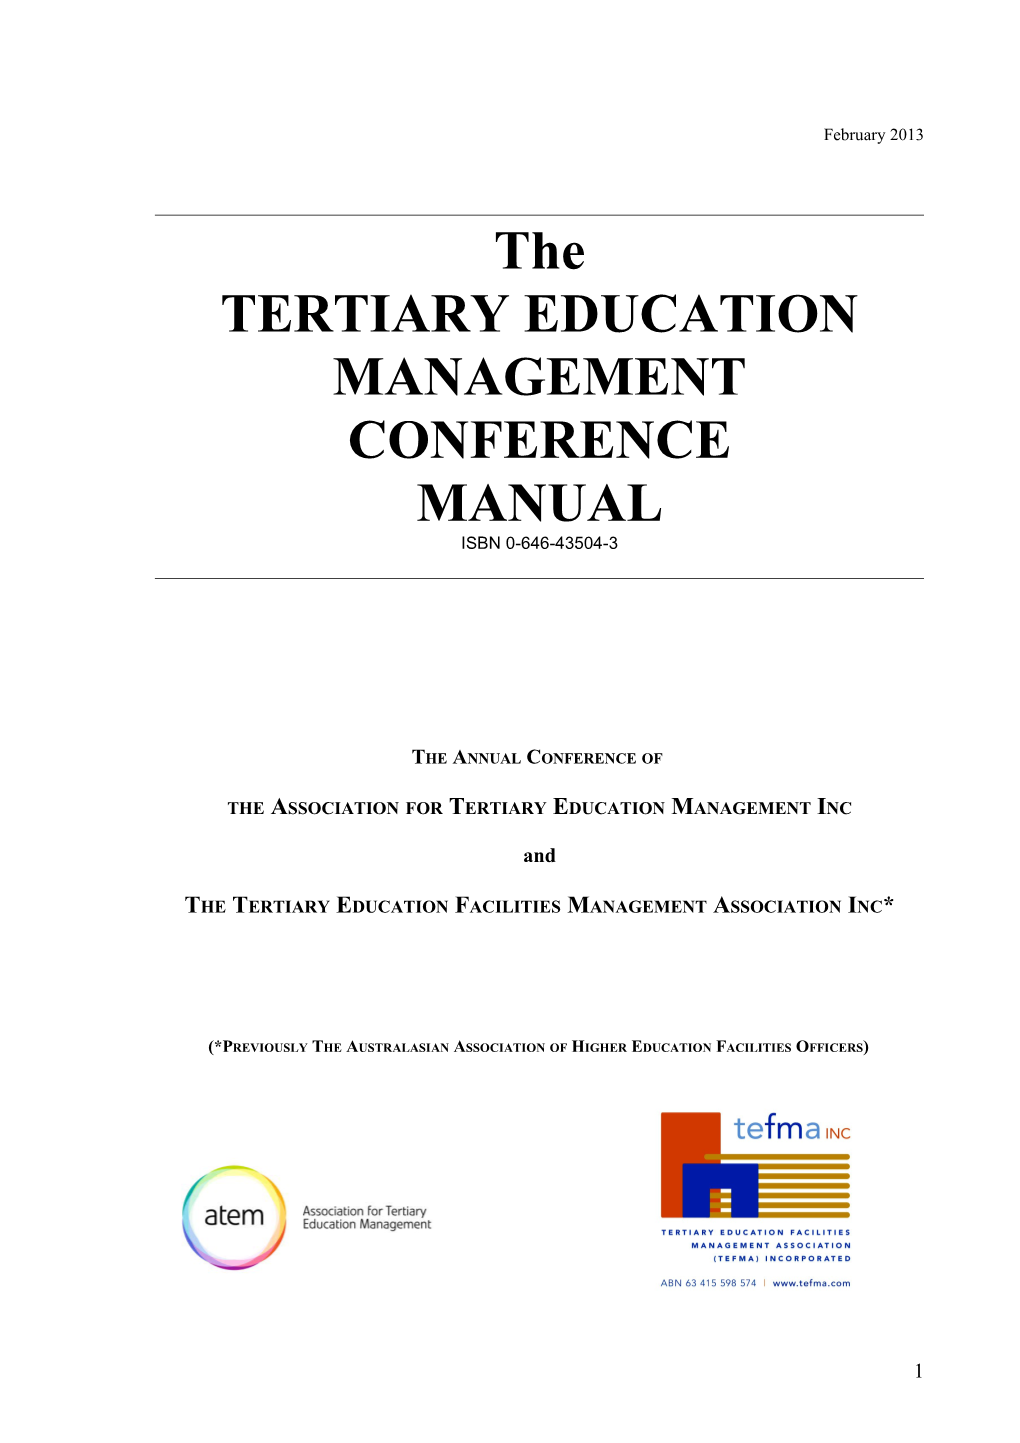 Tertiary Education Management Conference